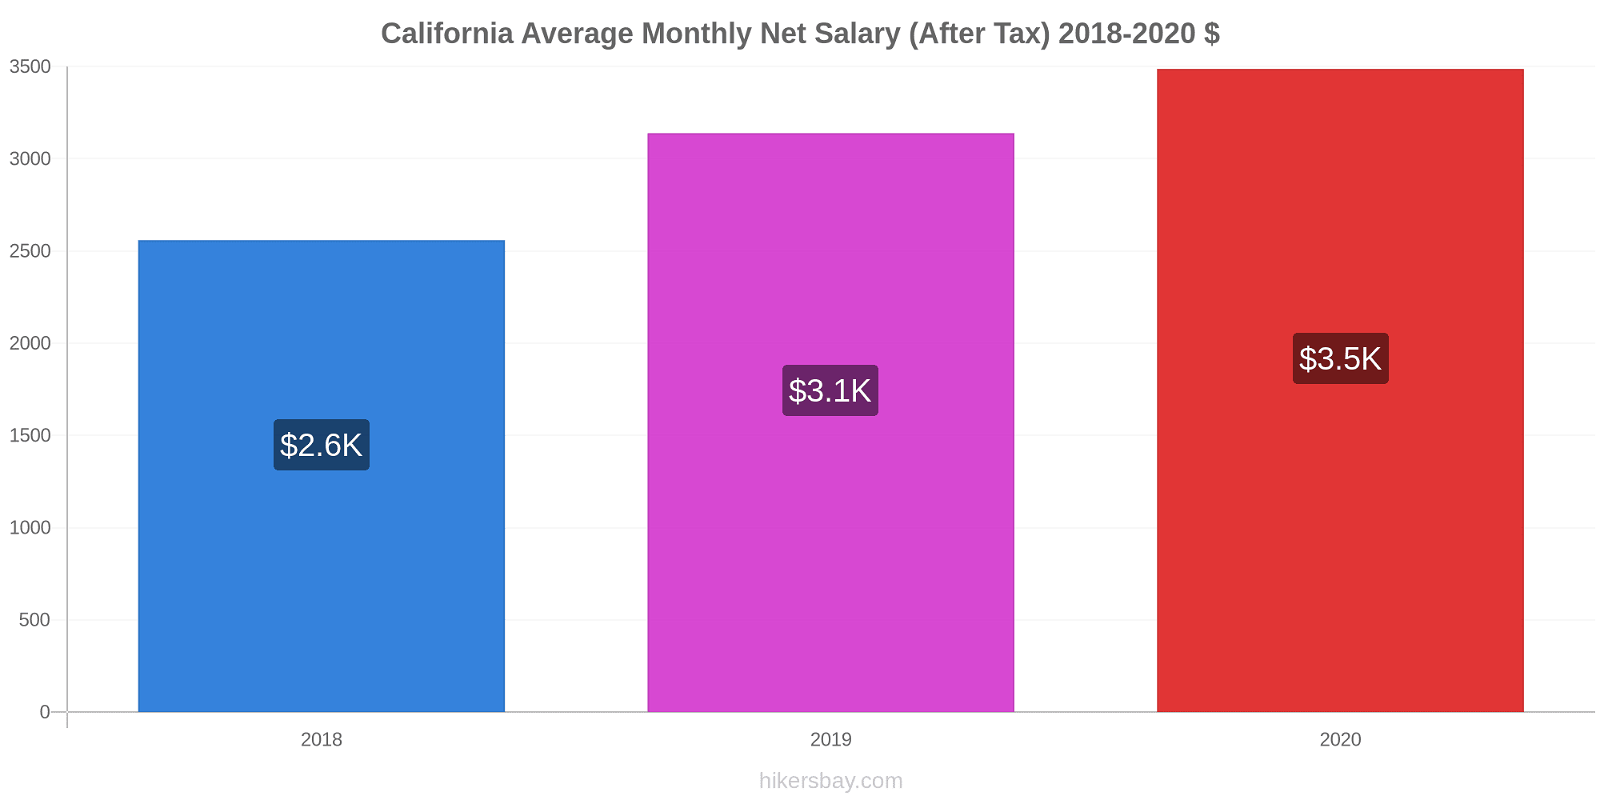 California price changes Average Monthly Net Salary (After Tax) hikersbay.com